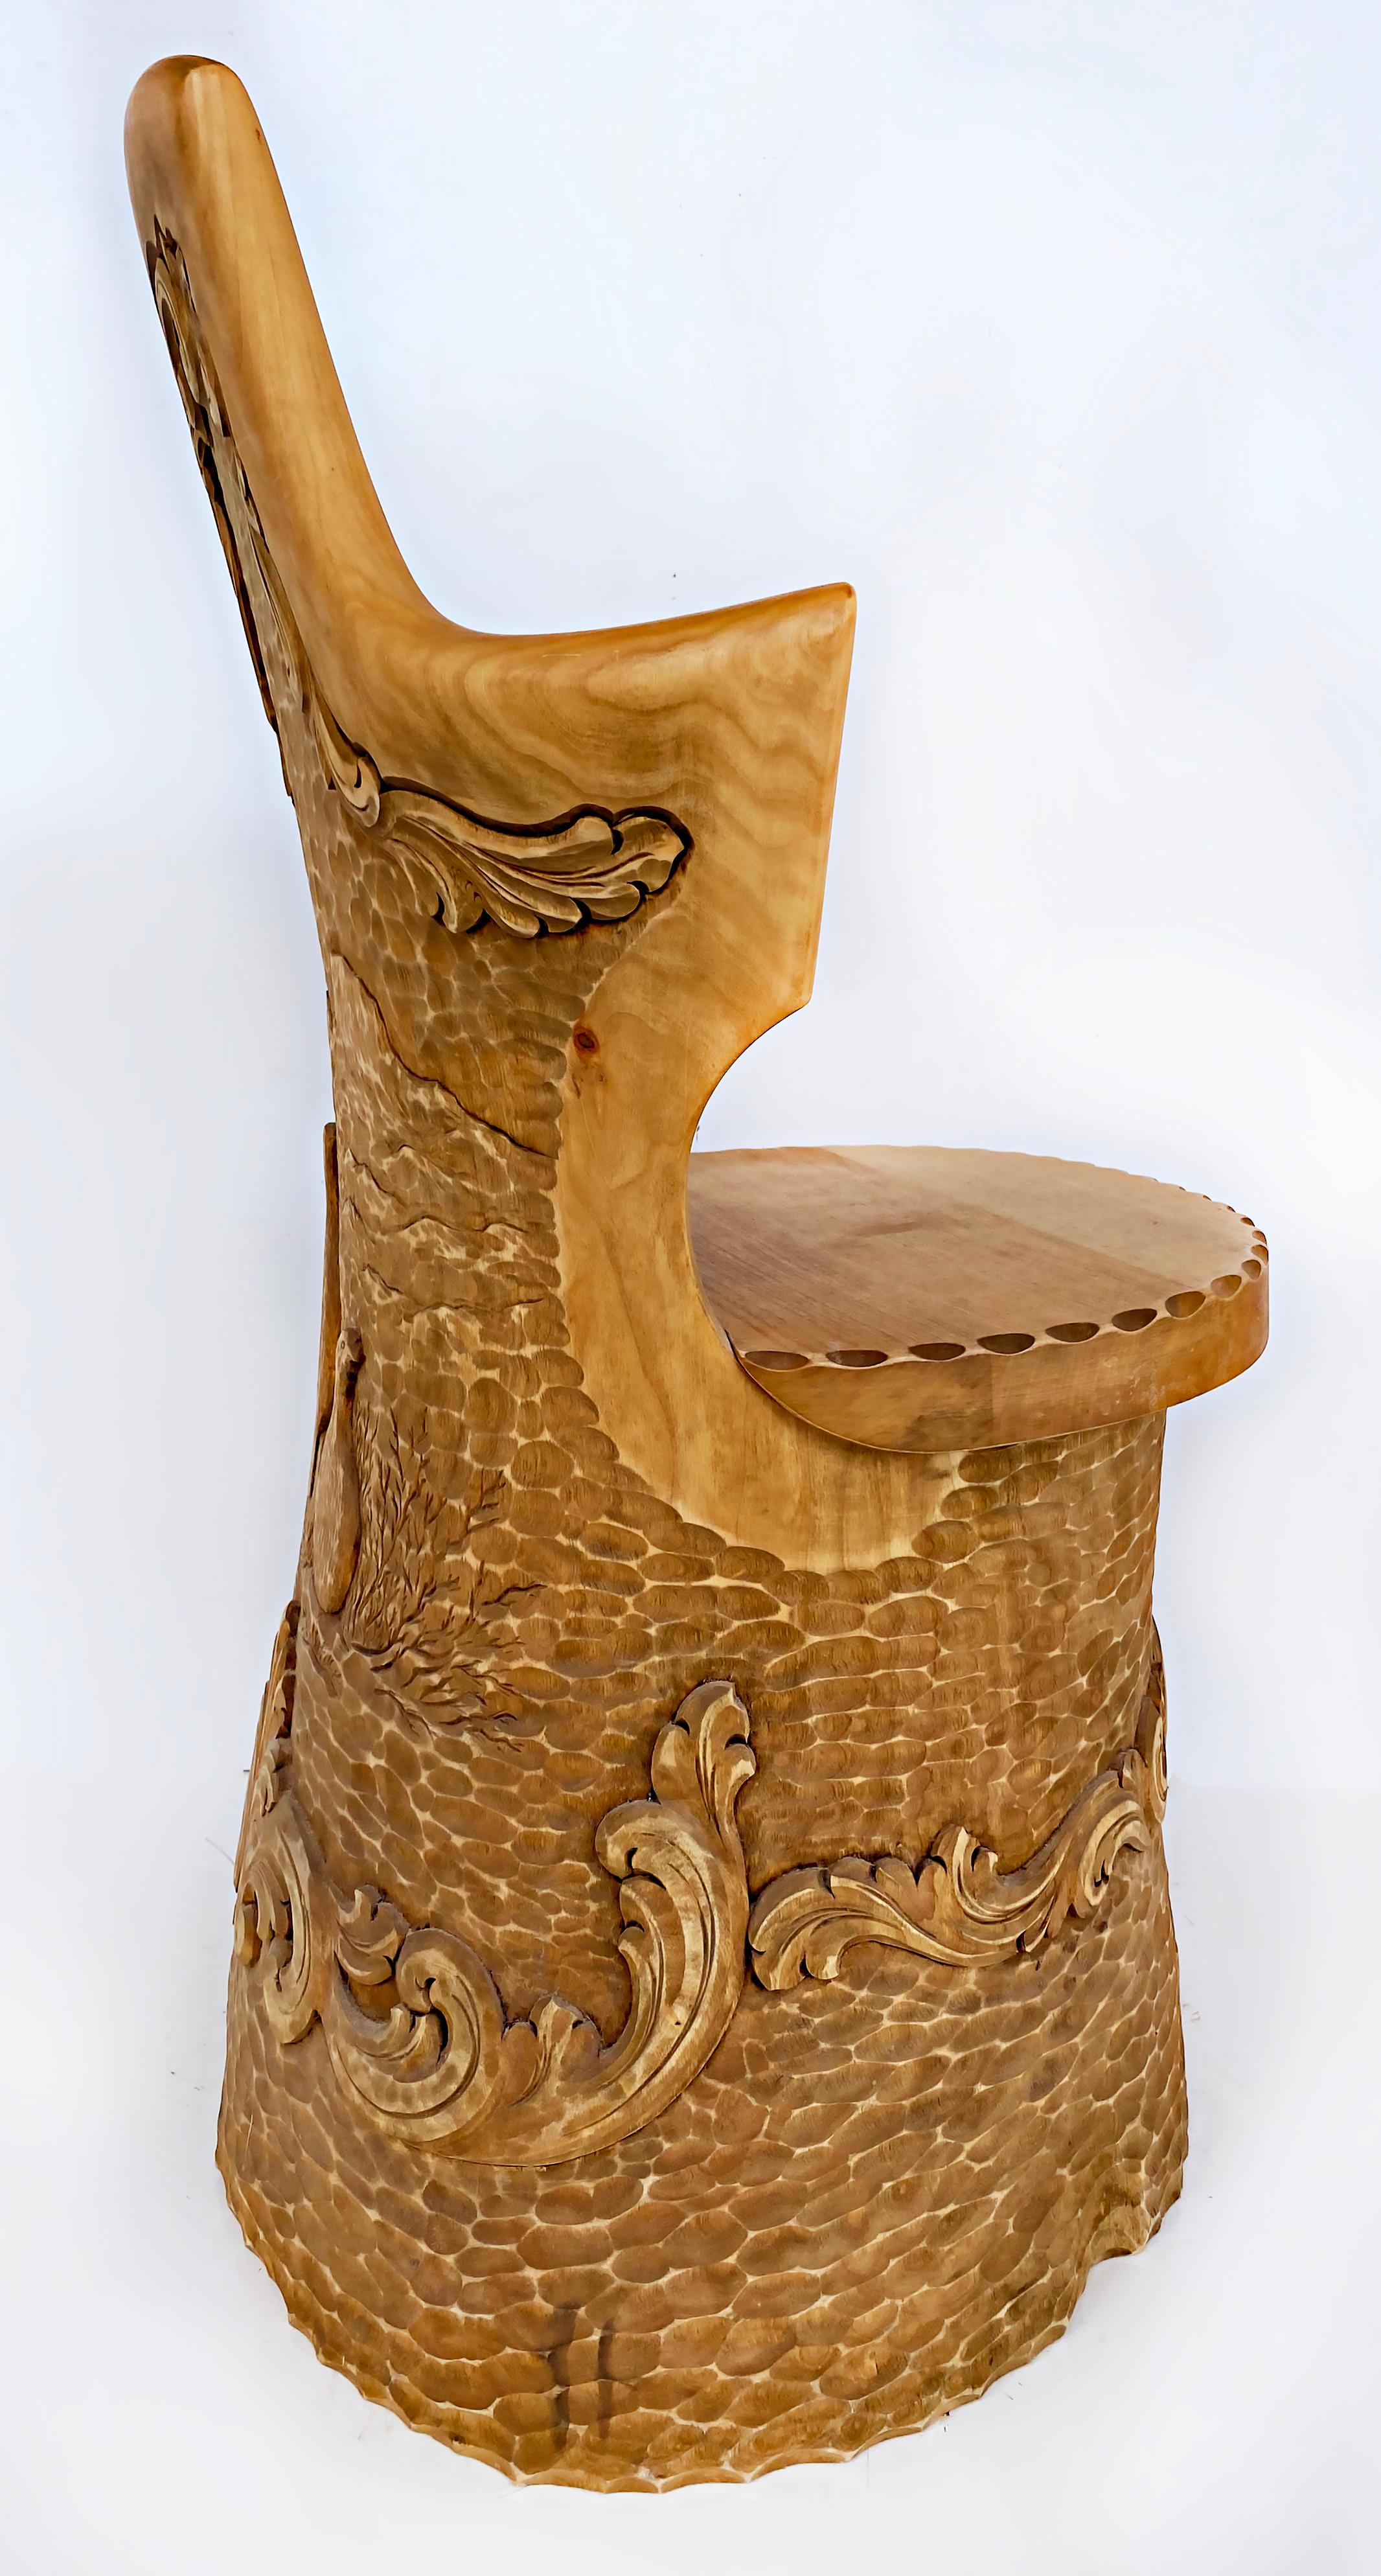 Norwegian Carved Kubbestol Chairs Hand-Carved Tree Trunks with Birds and Turkey For Sale 4